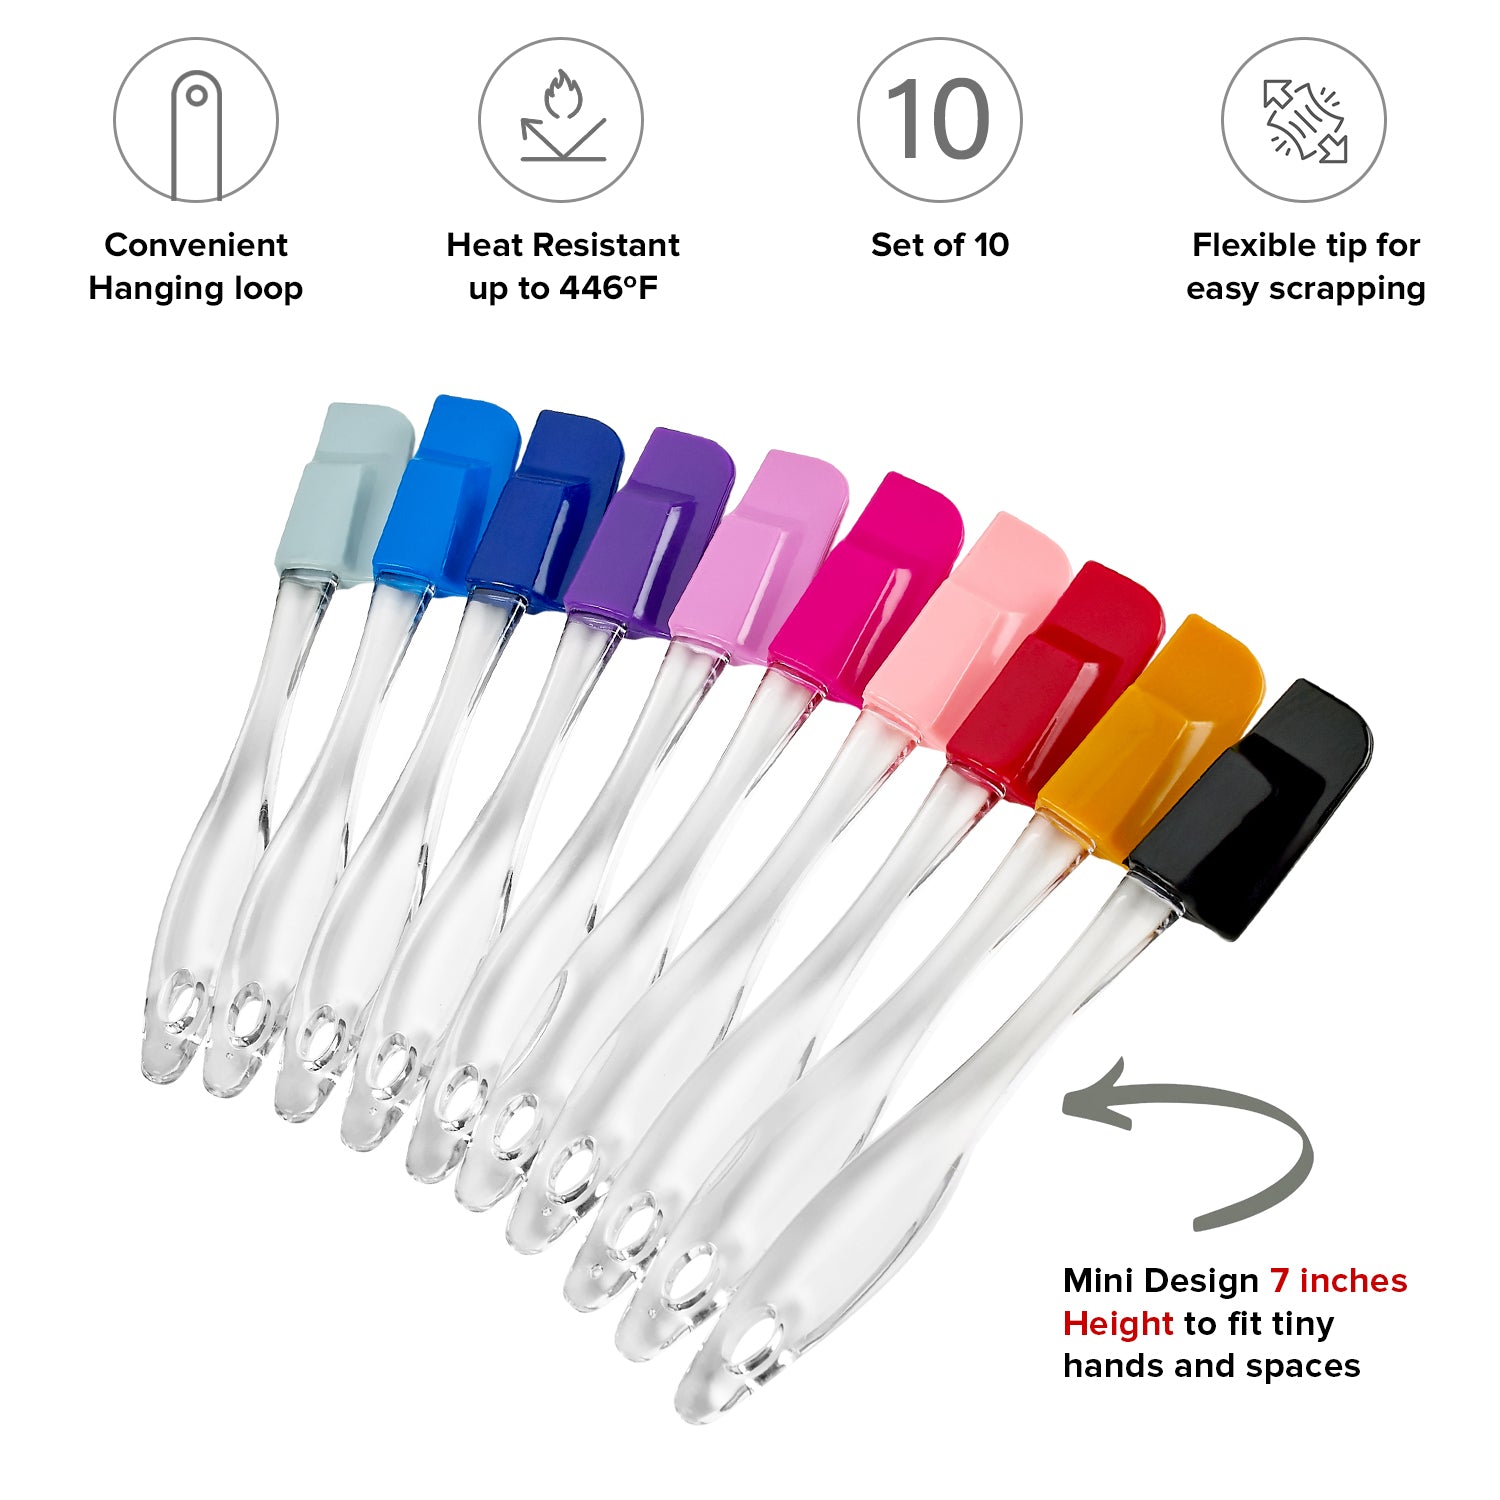 Mini Silicone Spatulas Set - Non-Stick & Heat-Resistant Turners, Pro-Grade - Baking Cooking Mixing 10-Piece Set, Multicolor - by Floridabrands